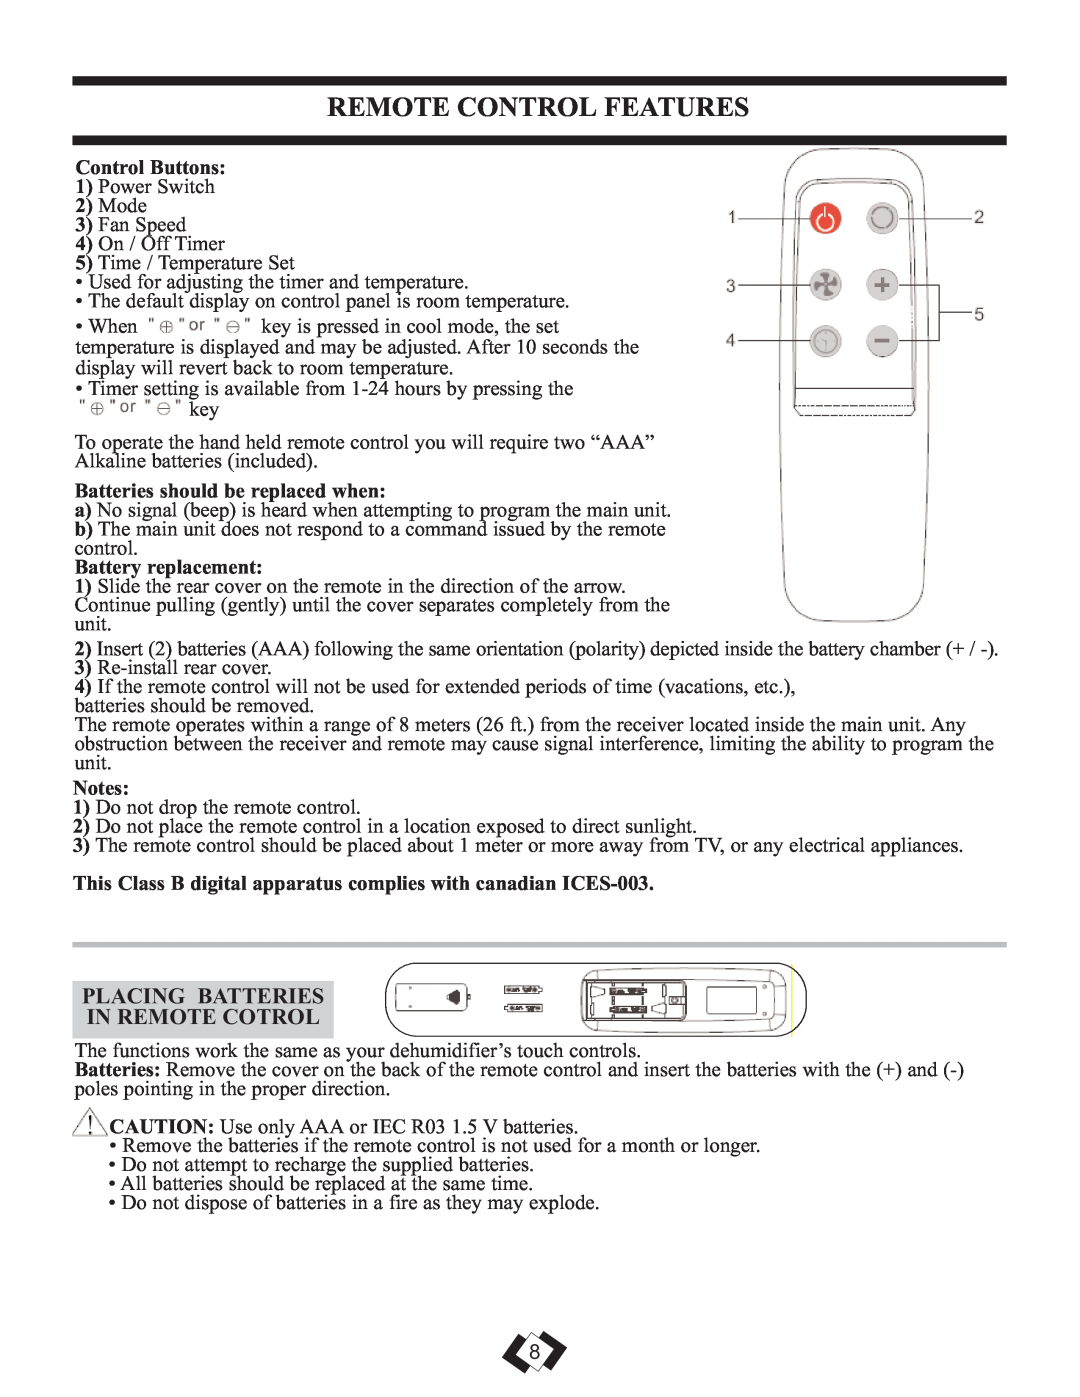 Danby DPAC 12099 Remote Control Features, Control Buttons, Batteries should be replaced when, Battery replacement 